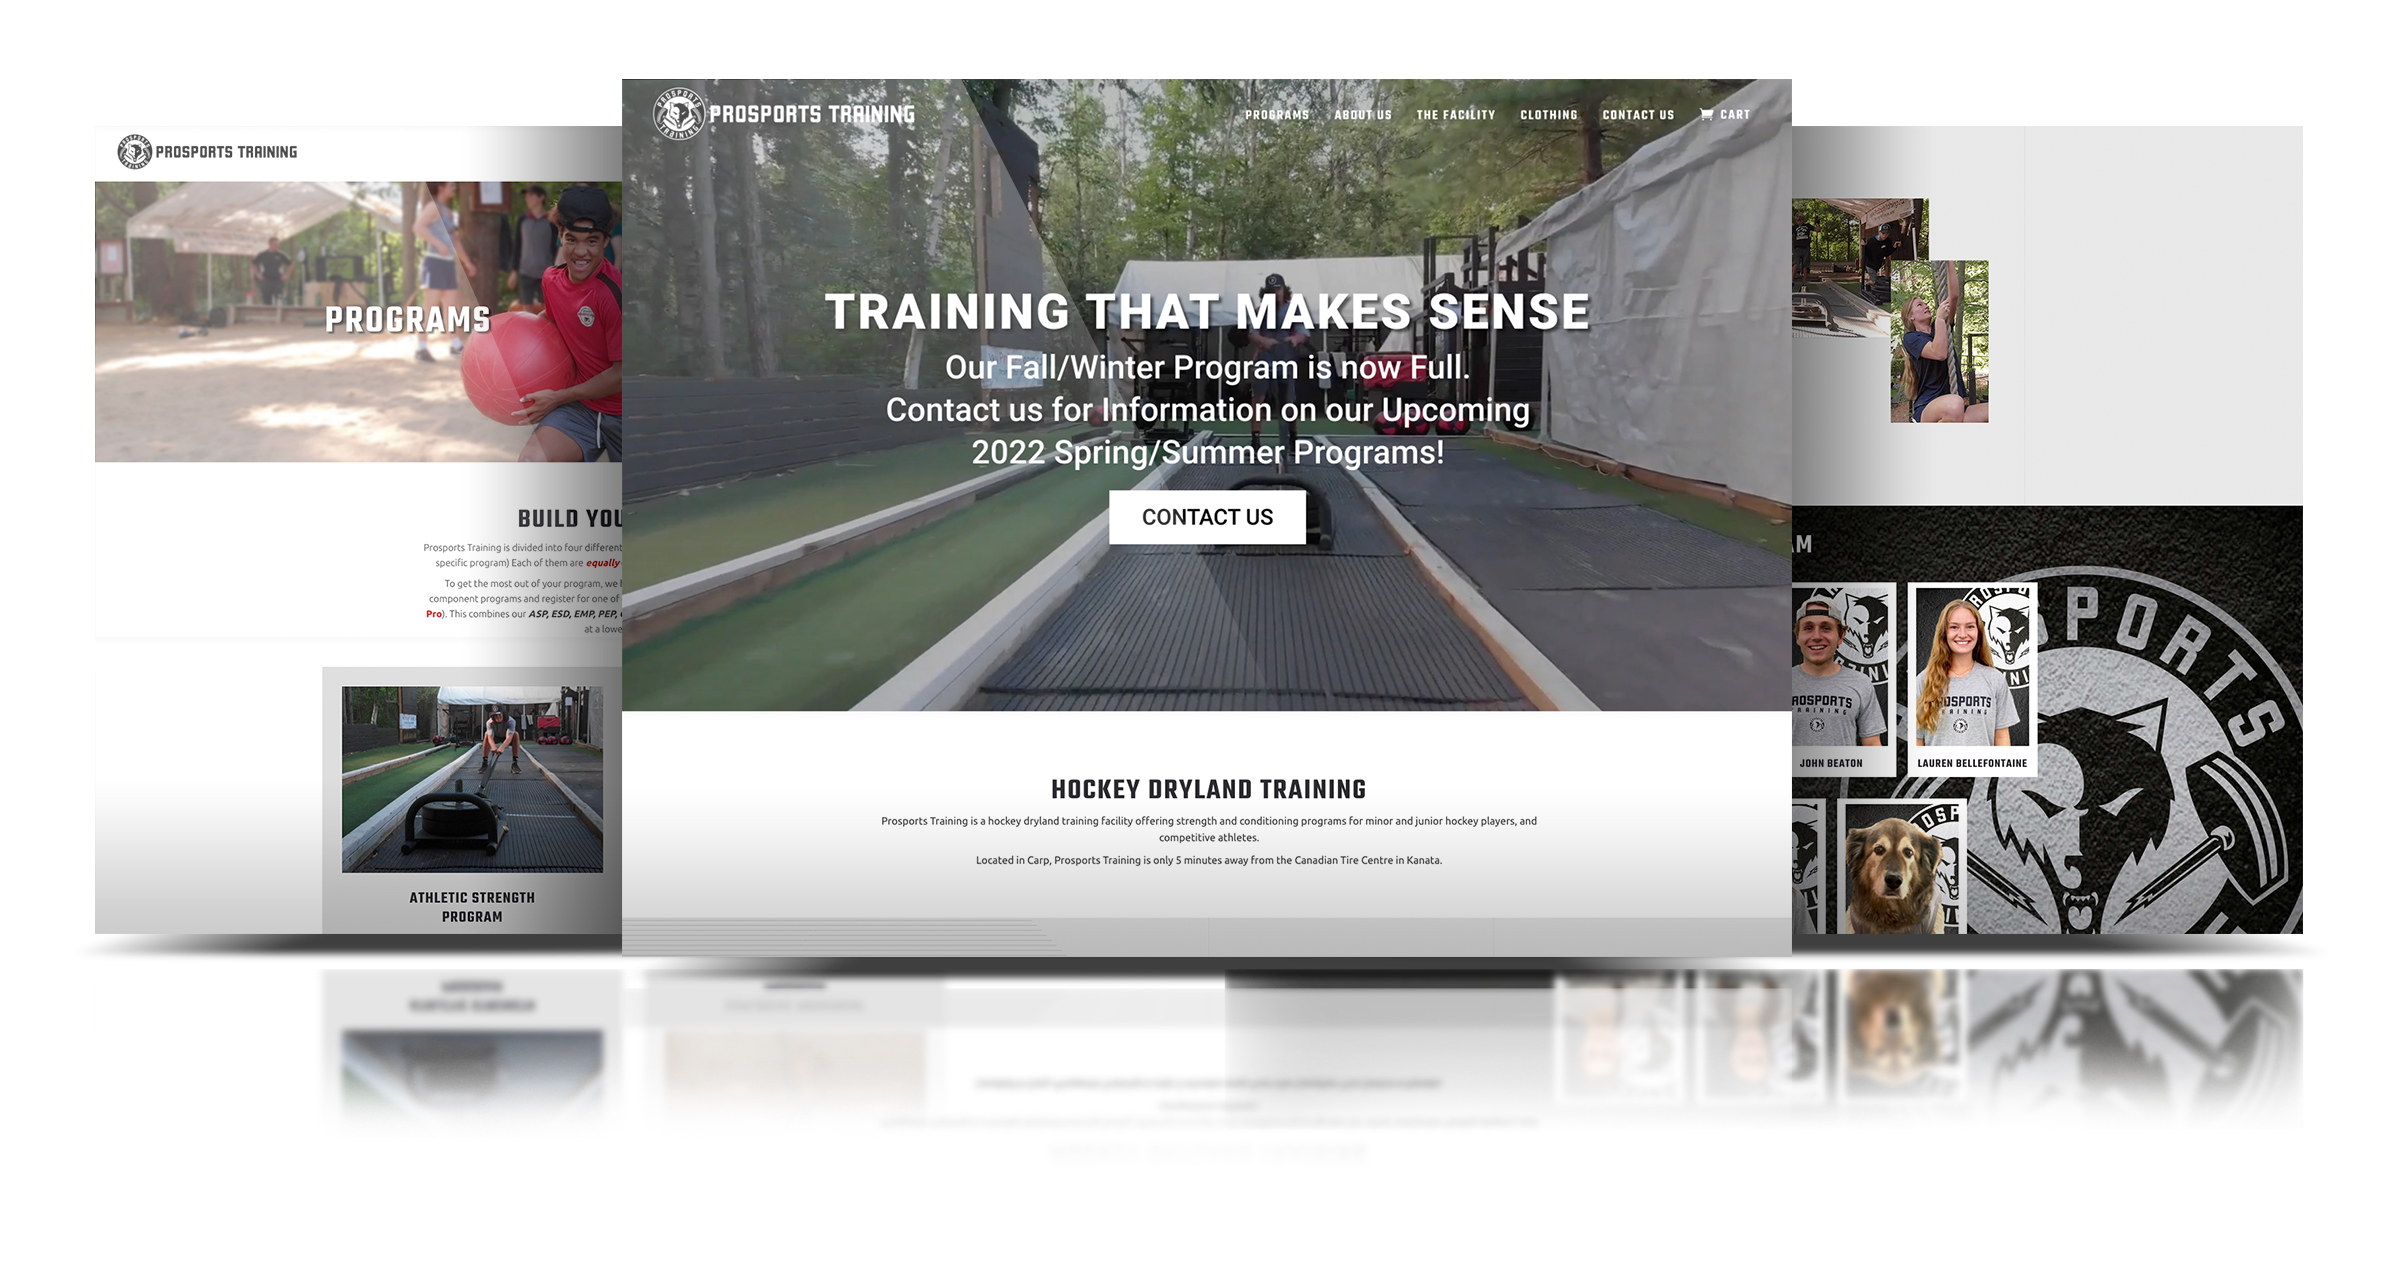 A three tiered website mockup of the Prosports Training website